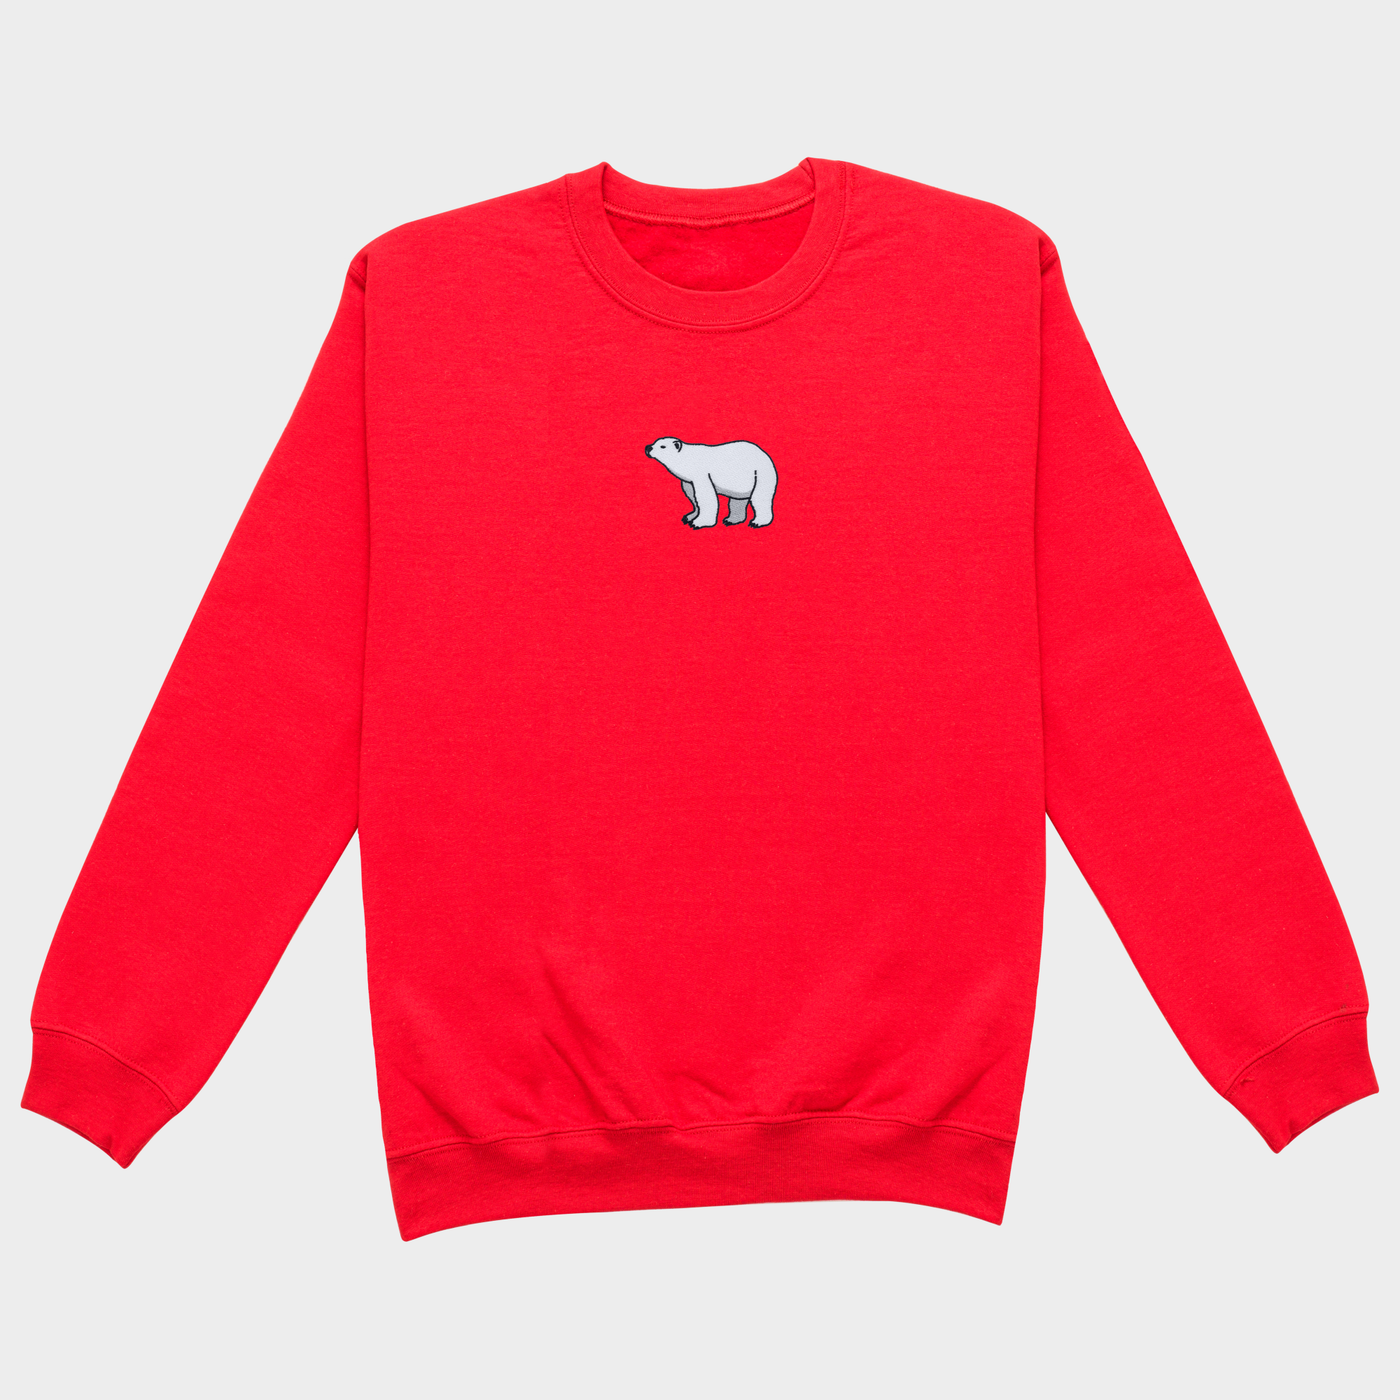 Bobby's Planet Women's Embroidered Polar Bear Sweatshirt from Arctic Polar Animals Collection in Red Color#color_red